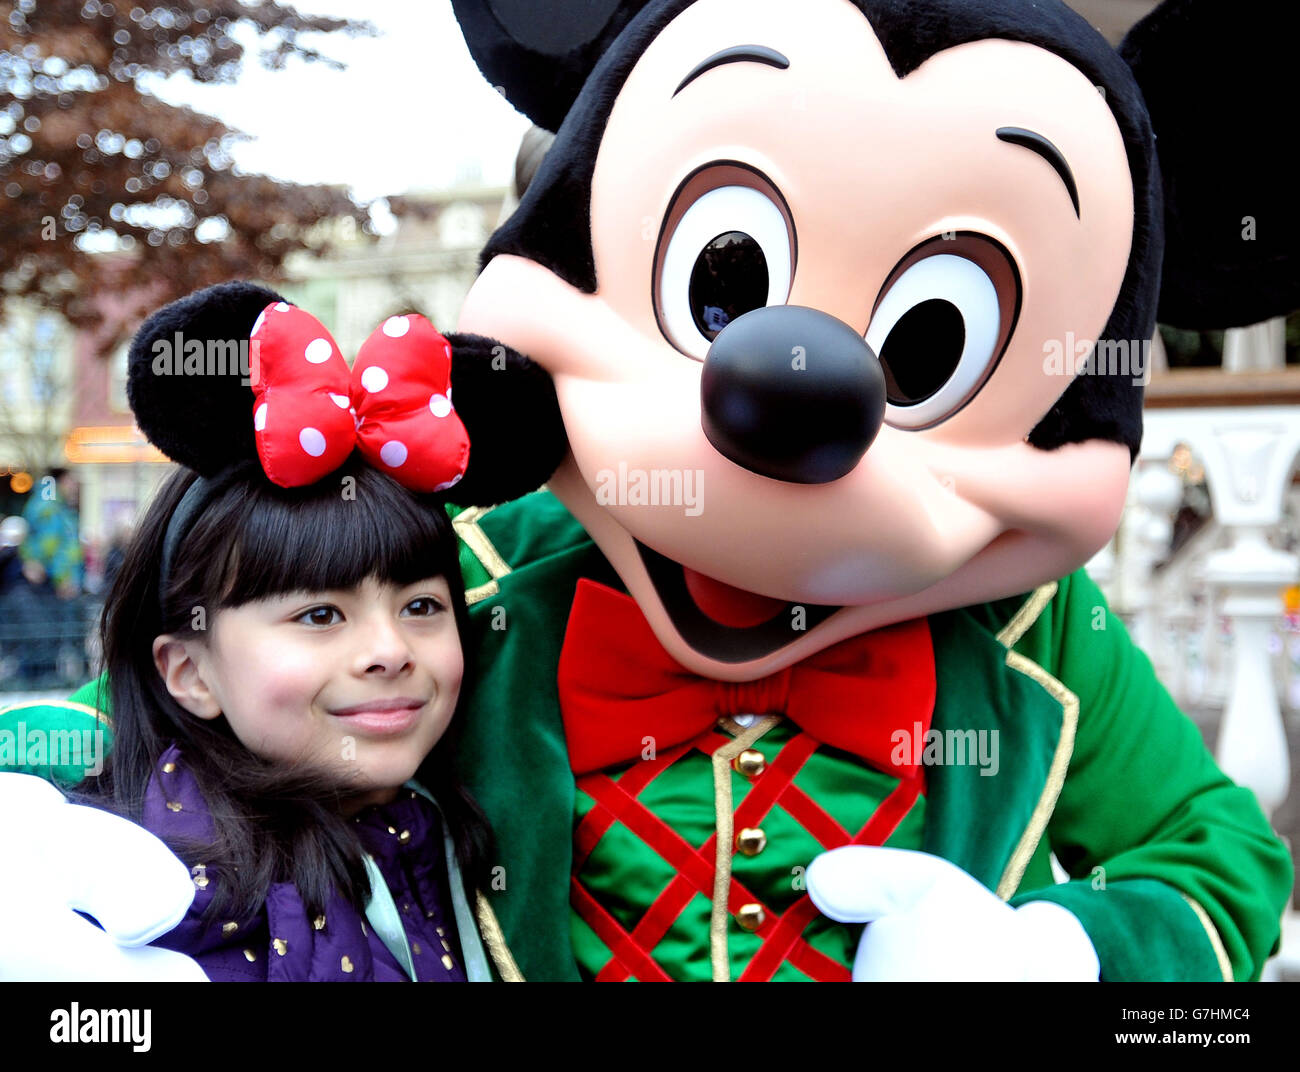 Abigail, nine, (surname not permitted) with Mickey Mouse during the charity trip to Disneyland Paris for under privileged children. PRESS ASSOCIATION Photo. Picture date: Tuesday December 16, 2014. Photo credit should read: Nick Ansell/PA Wire Stock Photo